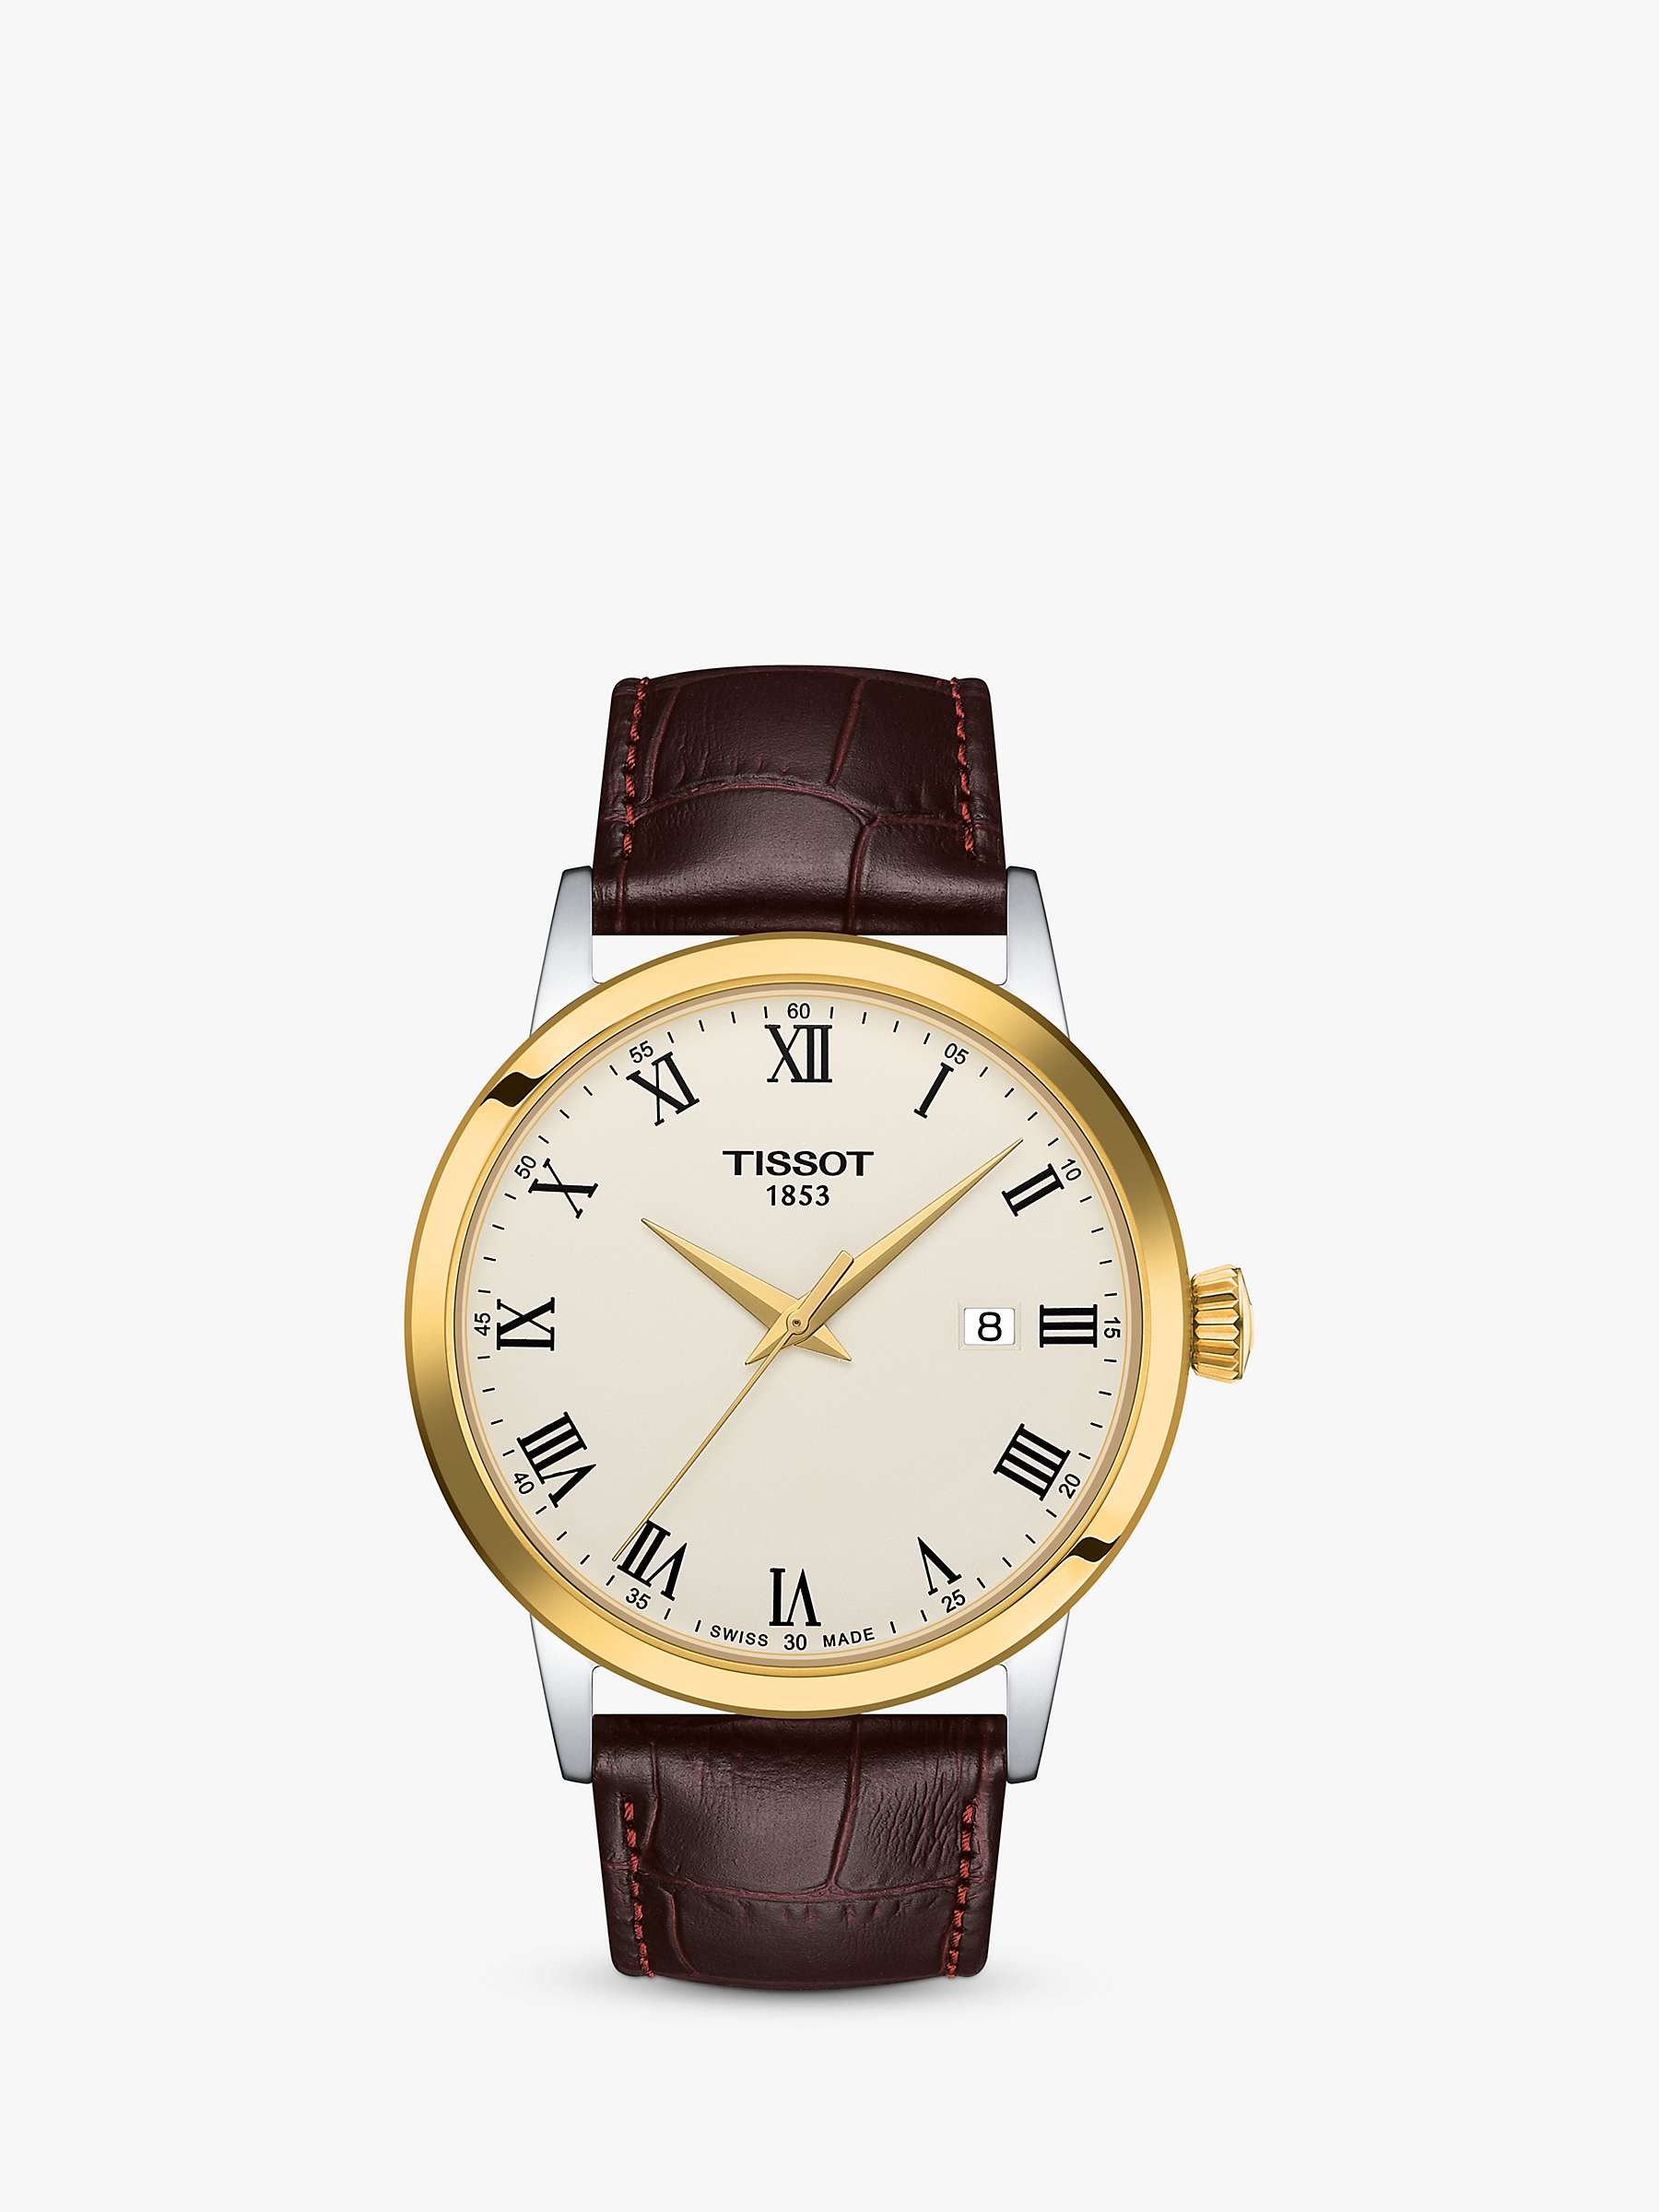 Buy Tissot Men's Classic Dream Date Leather Strap Watch Online at johnlewis.com